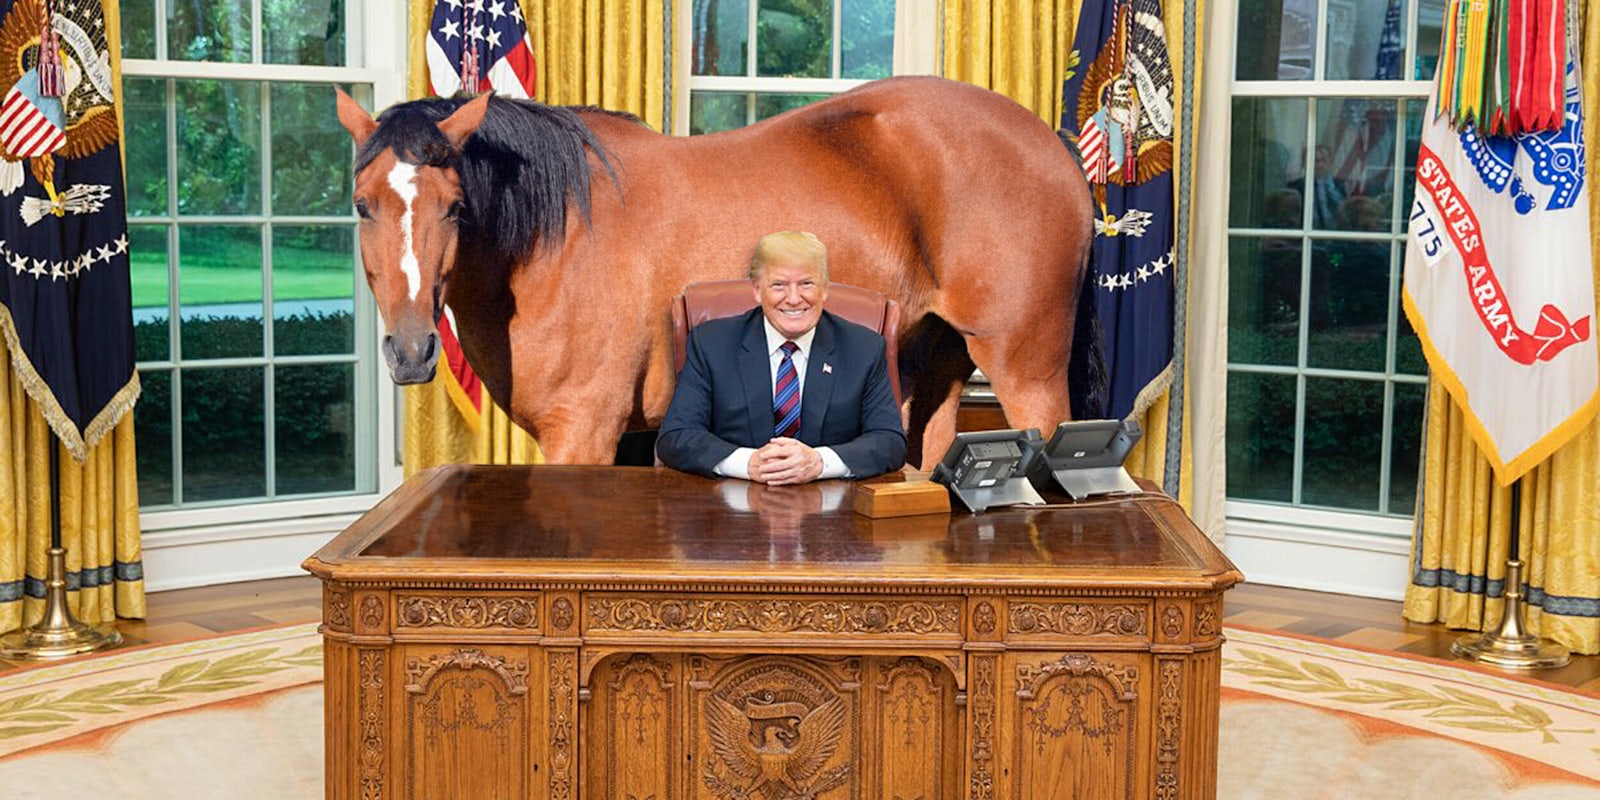 Triple Crown winner Justified in Oval Office with Donald Trump